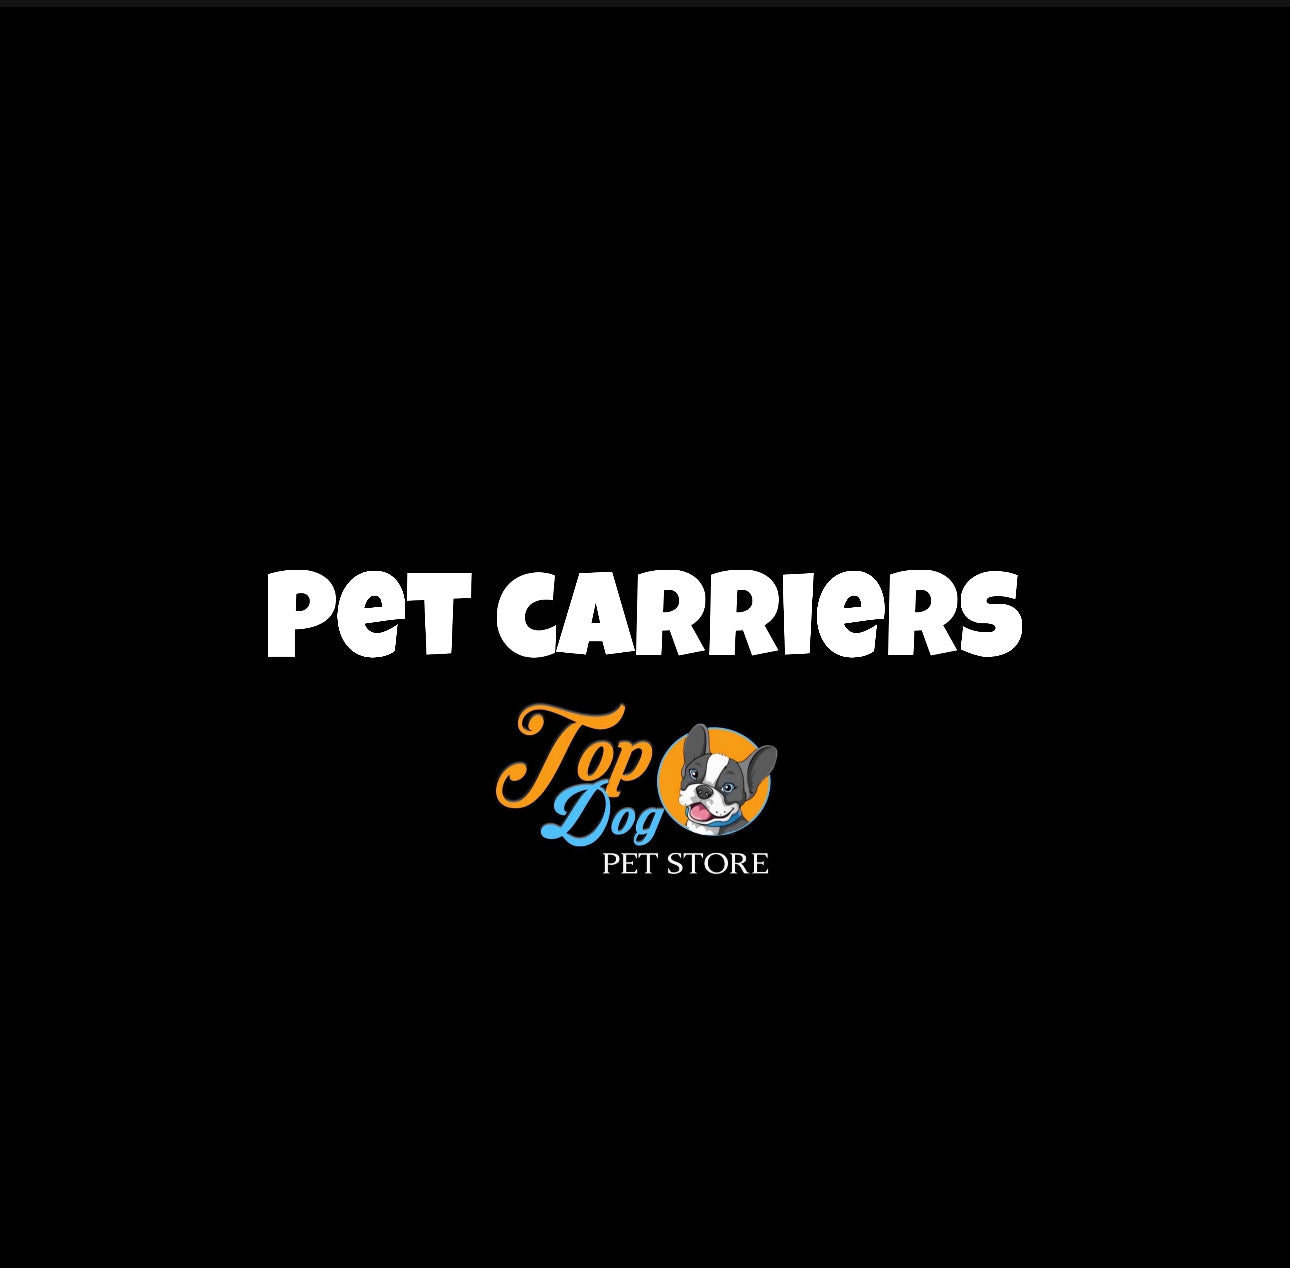 PET CARRIERS